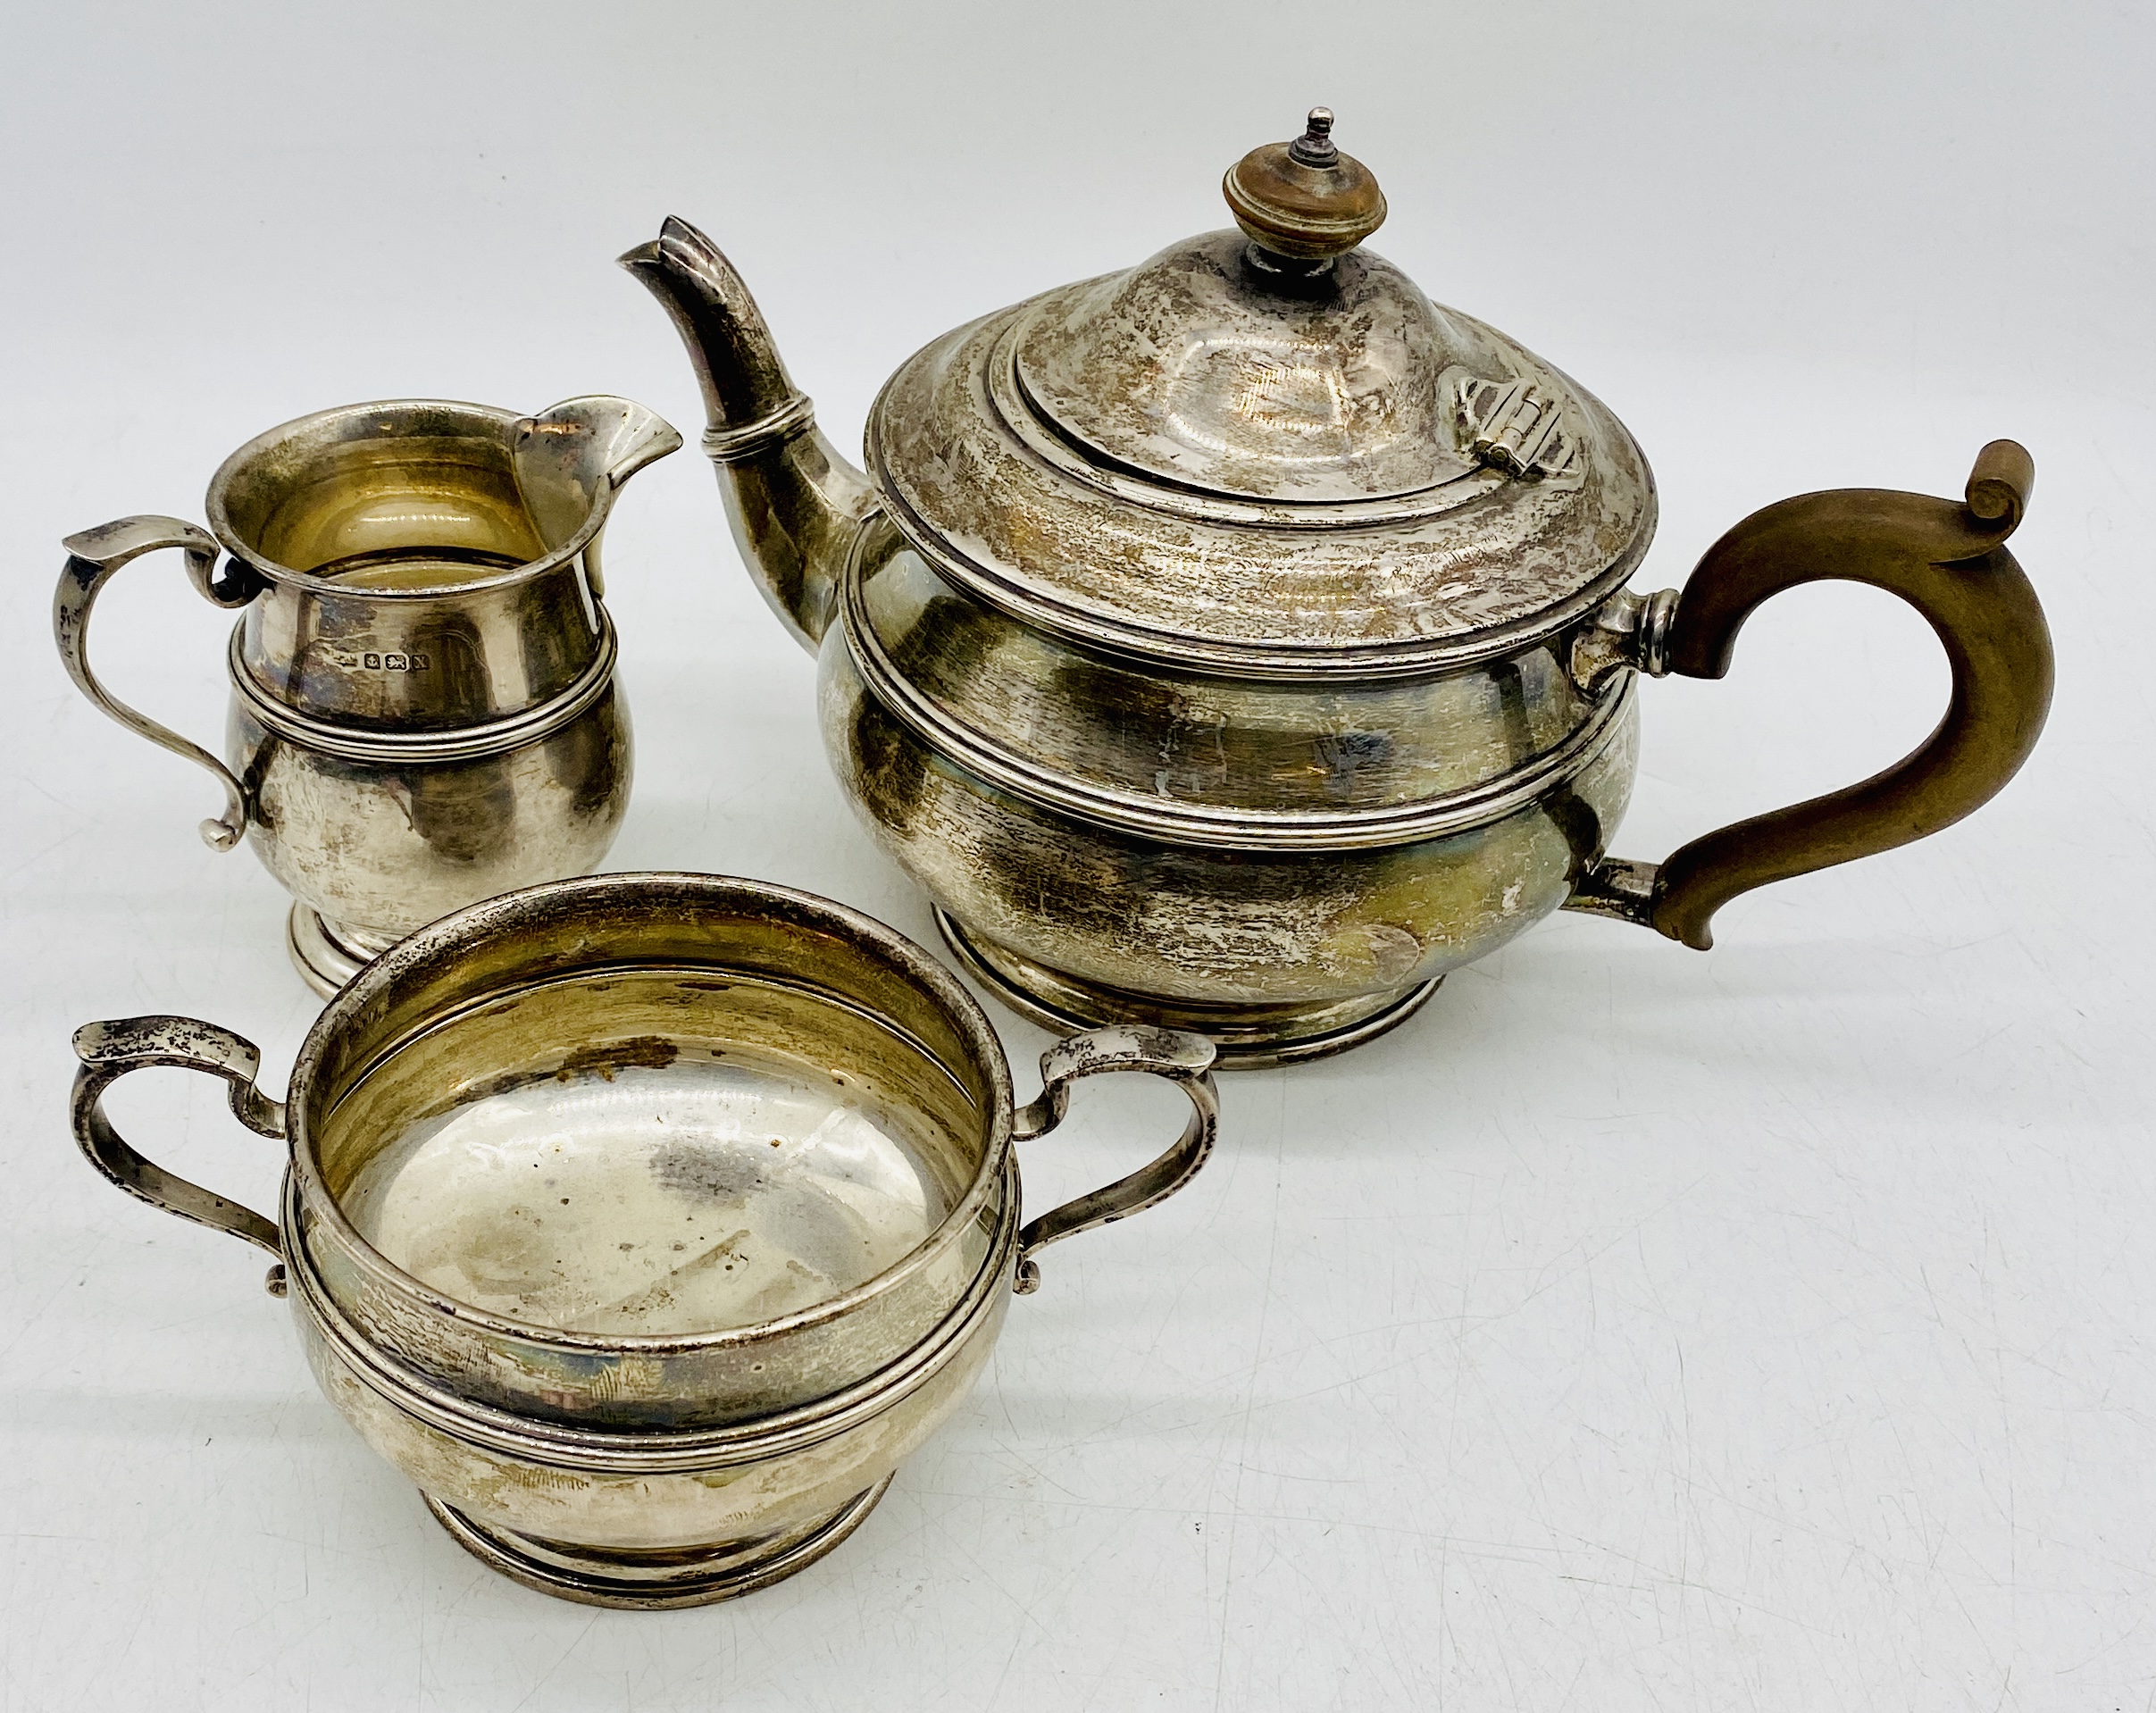 A hallmarked silver three piece Mappin & Webb tea set, dated 1922, total weight 951g (30.58 troy